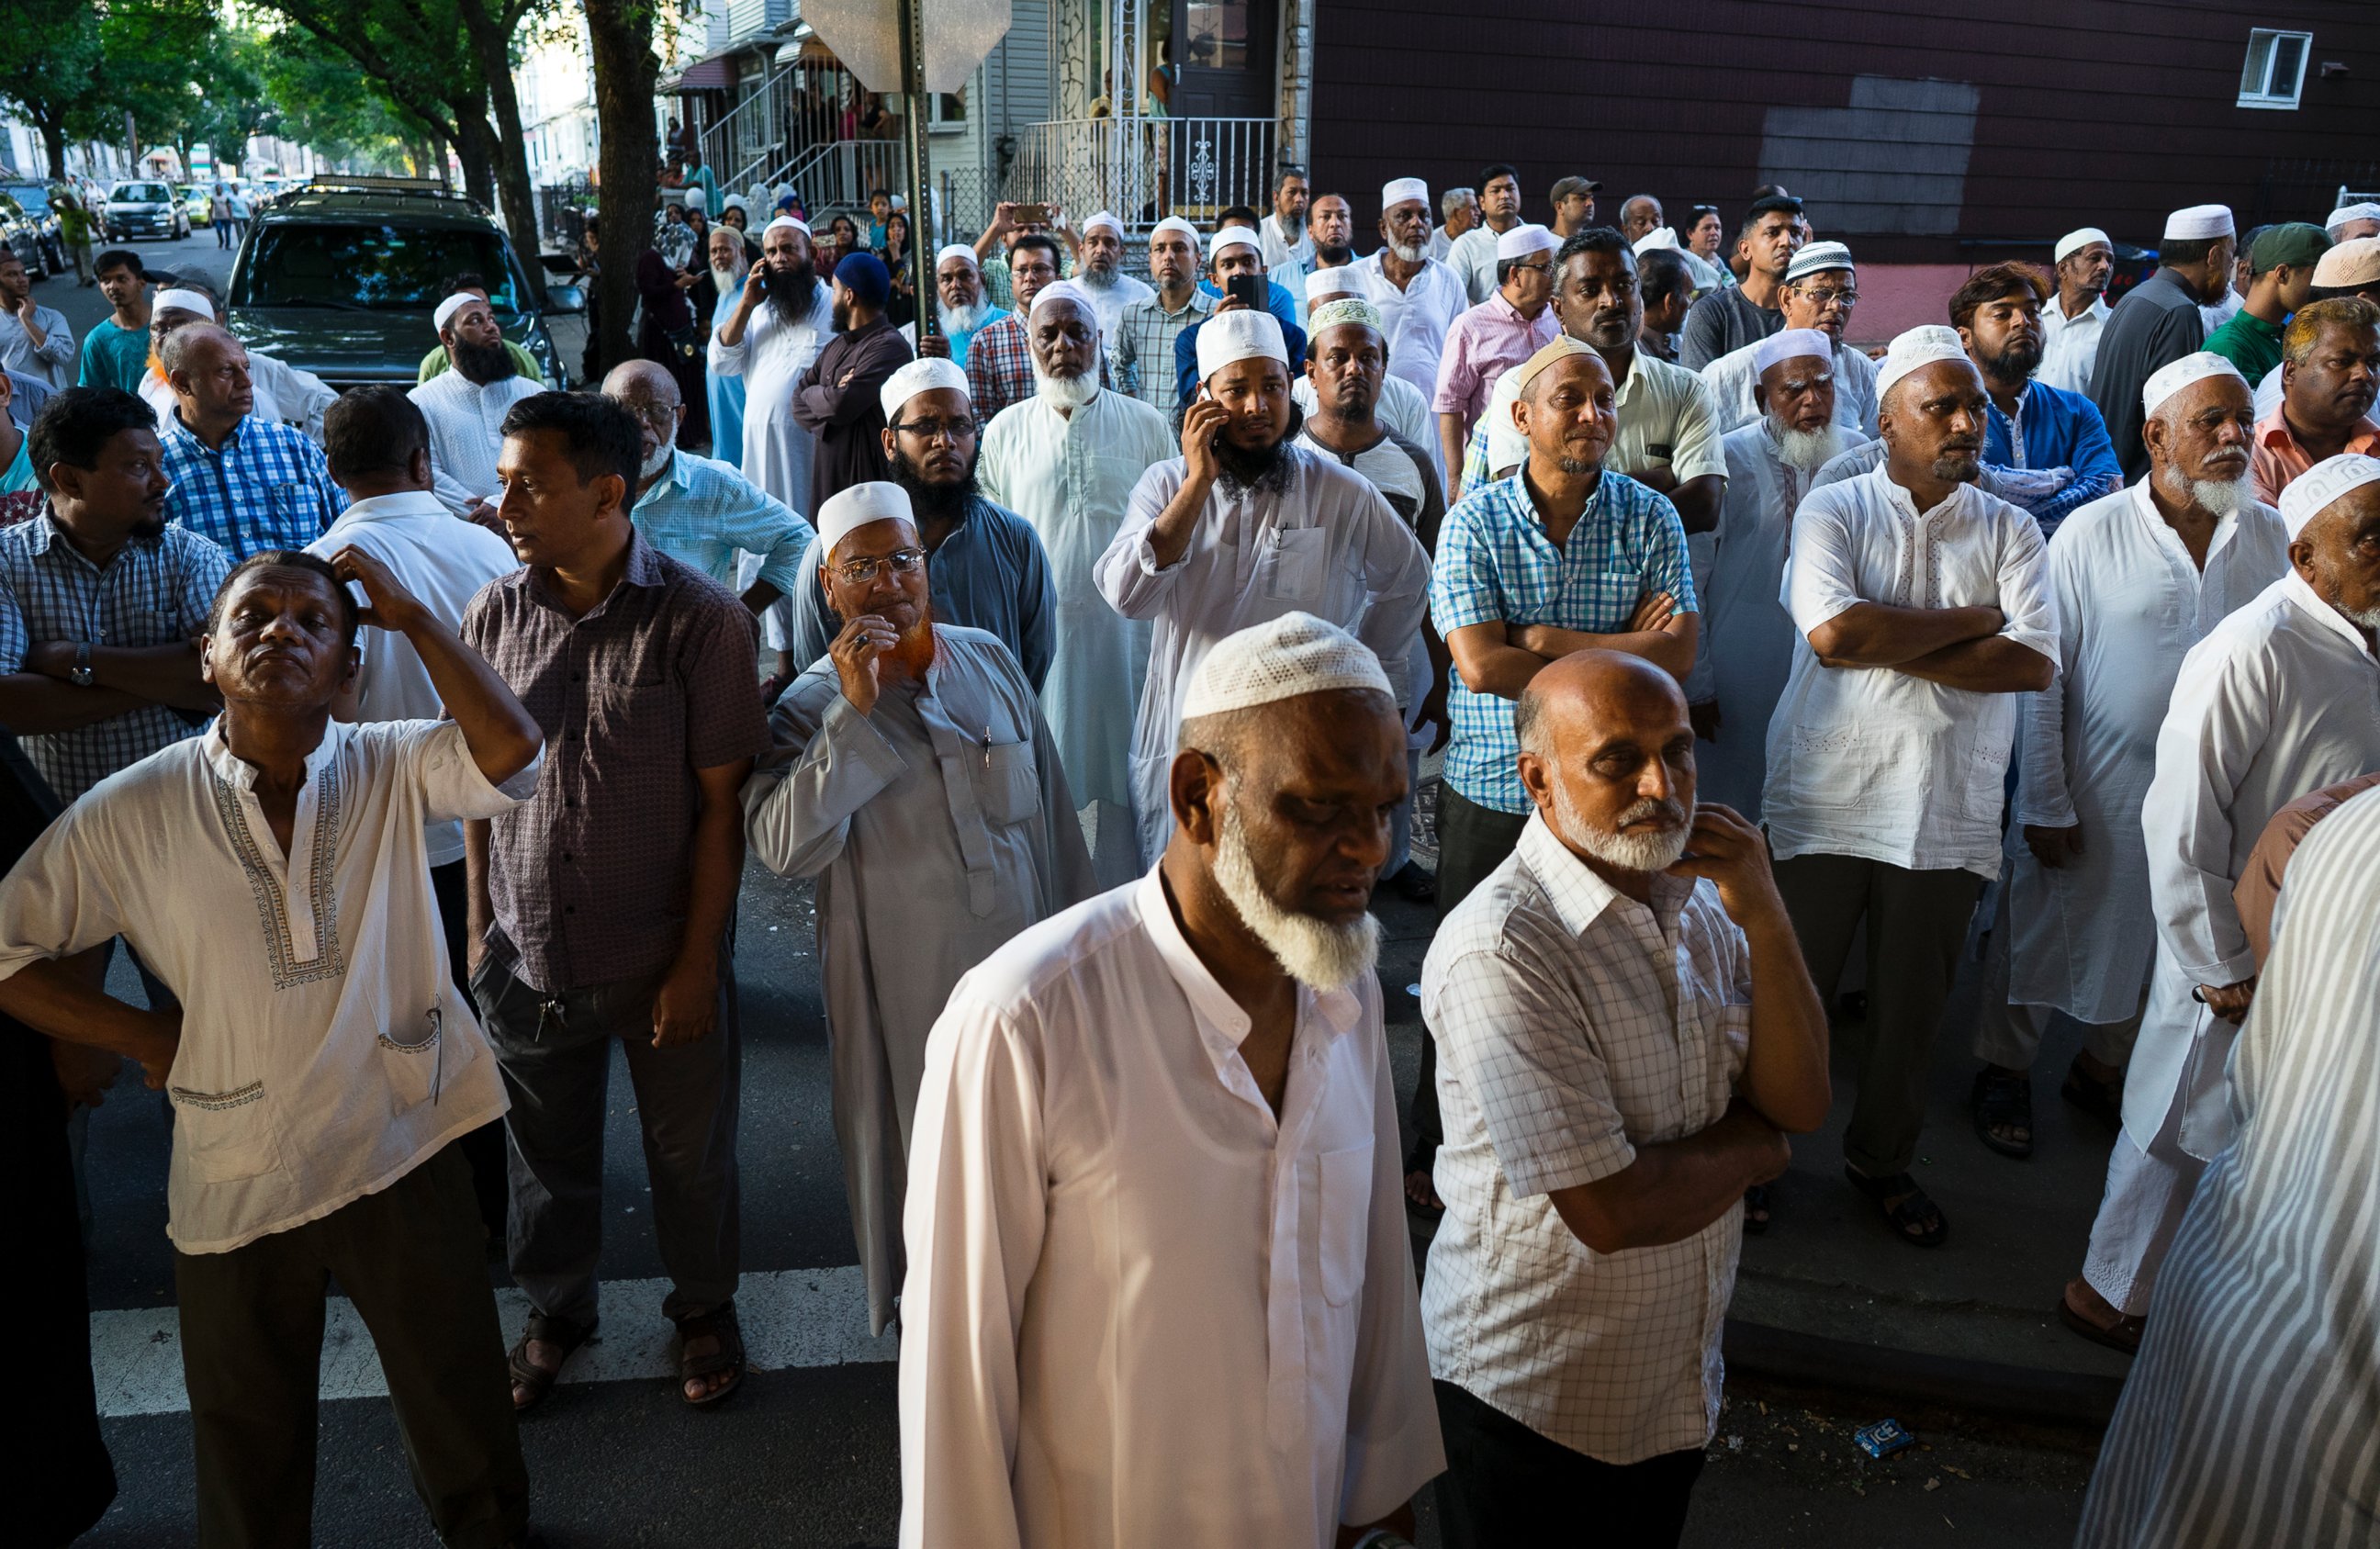 PHOTO: In this Saturday, Aug. 13, 2016, photo, people gather near a crime scene for a demonstration after the leader of a New York City mosque and an associate were fatally shot.